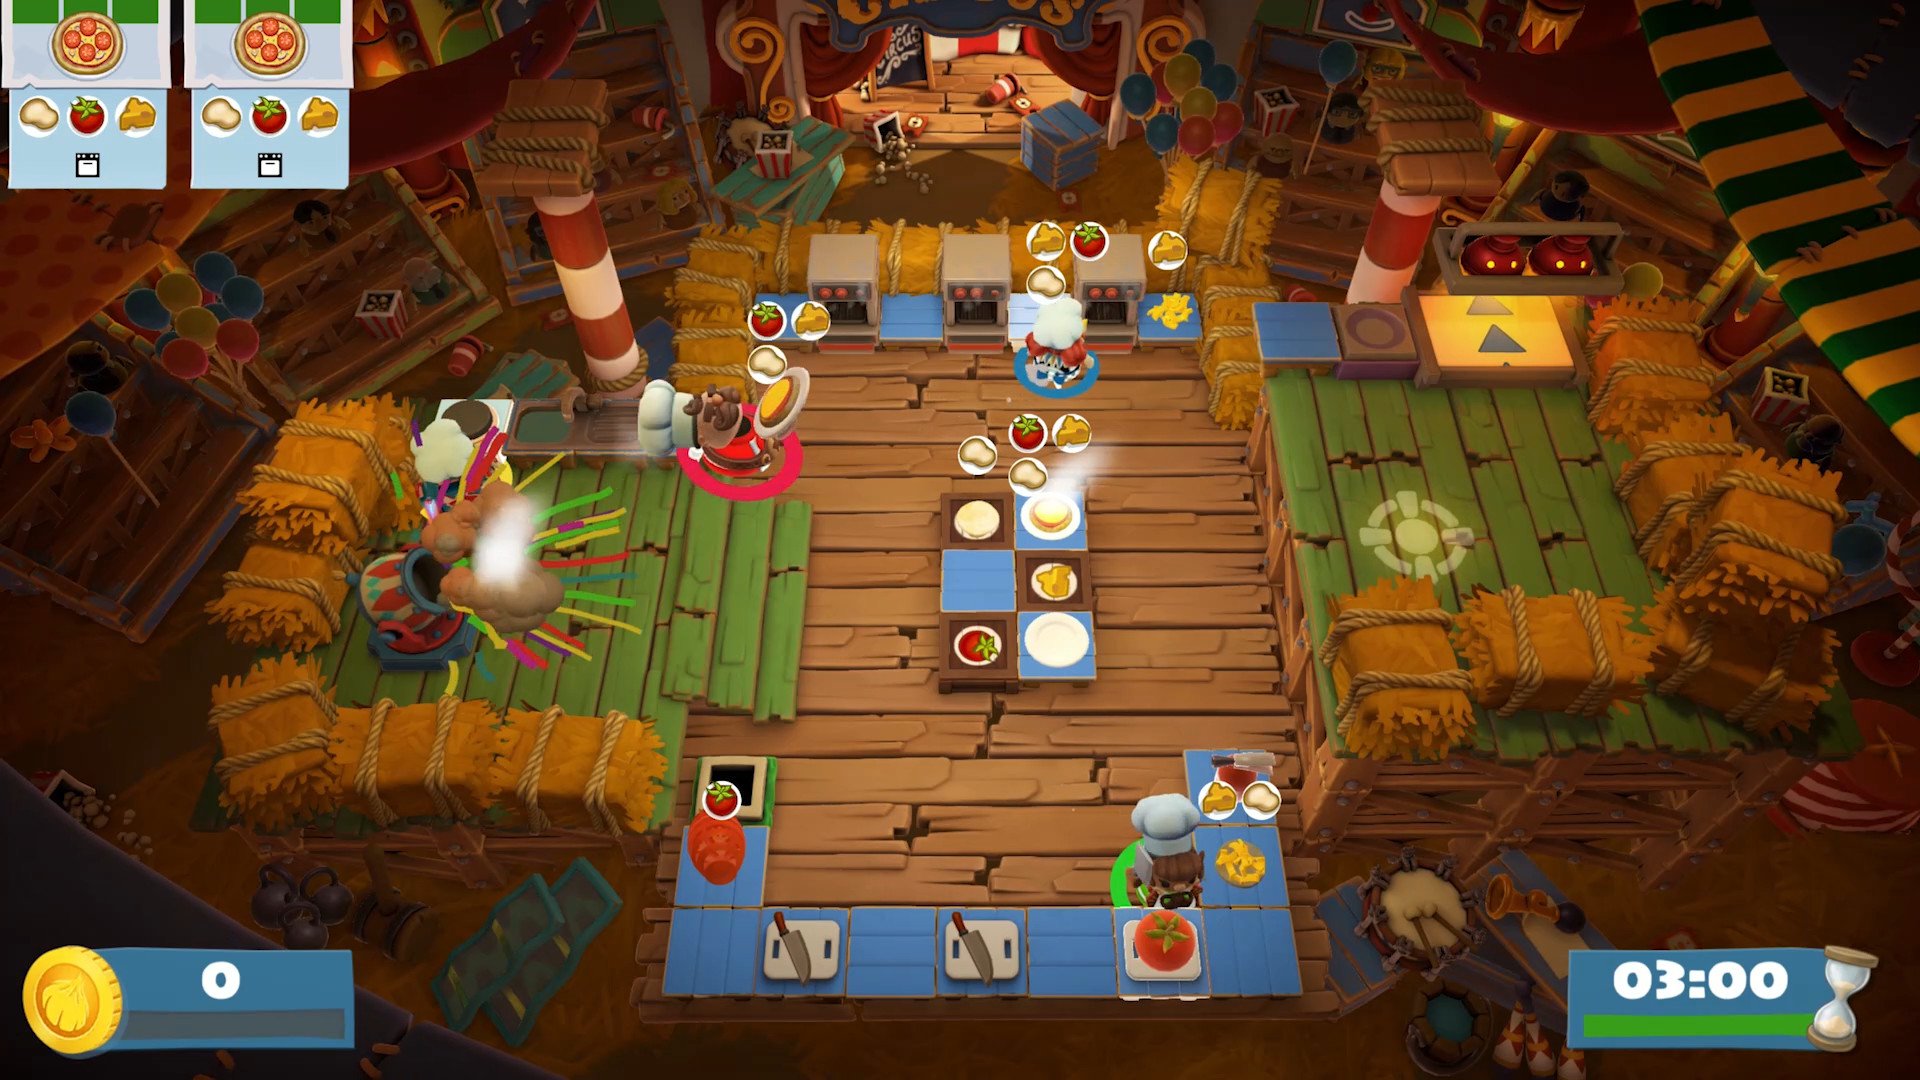 Overcooked! 2 Carnival of Chaos 1